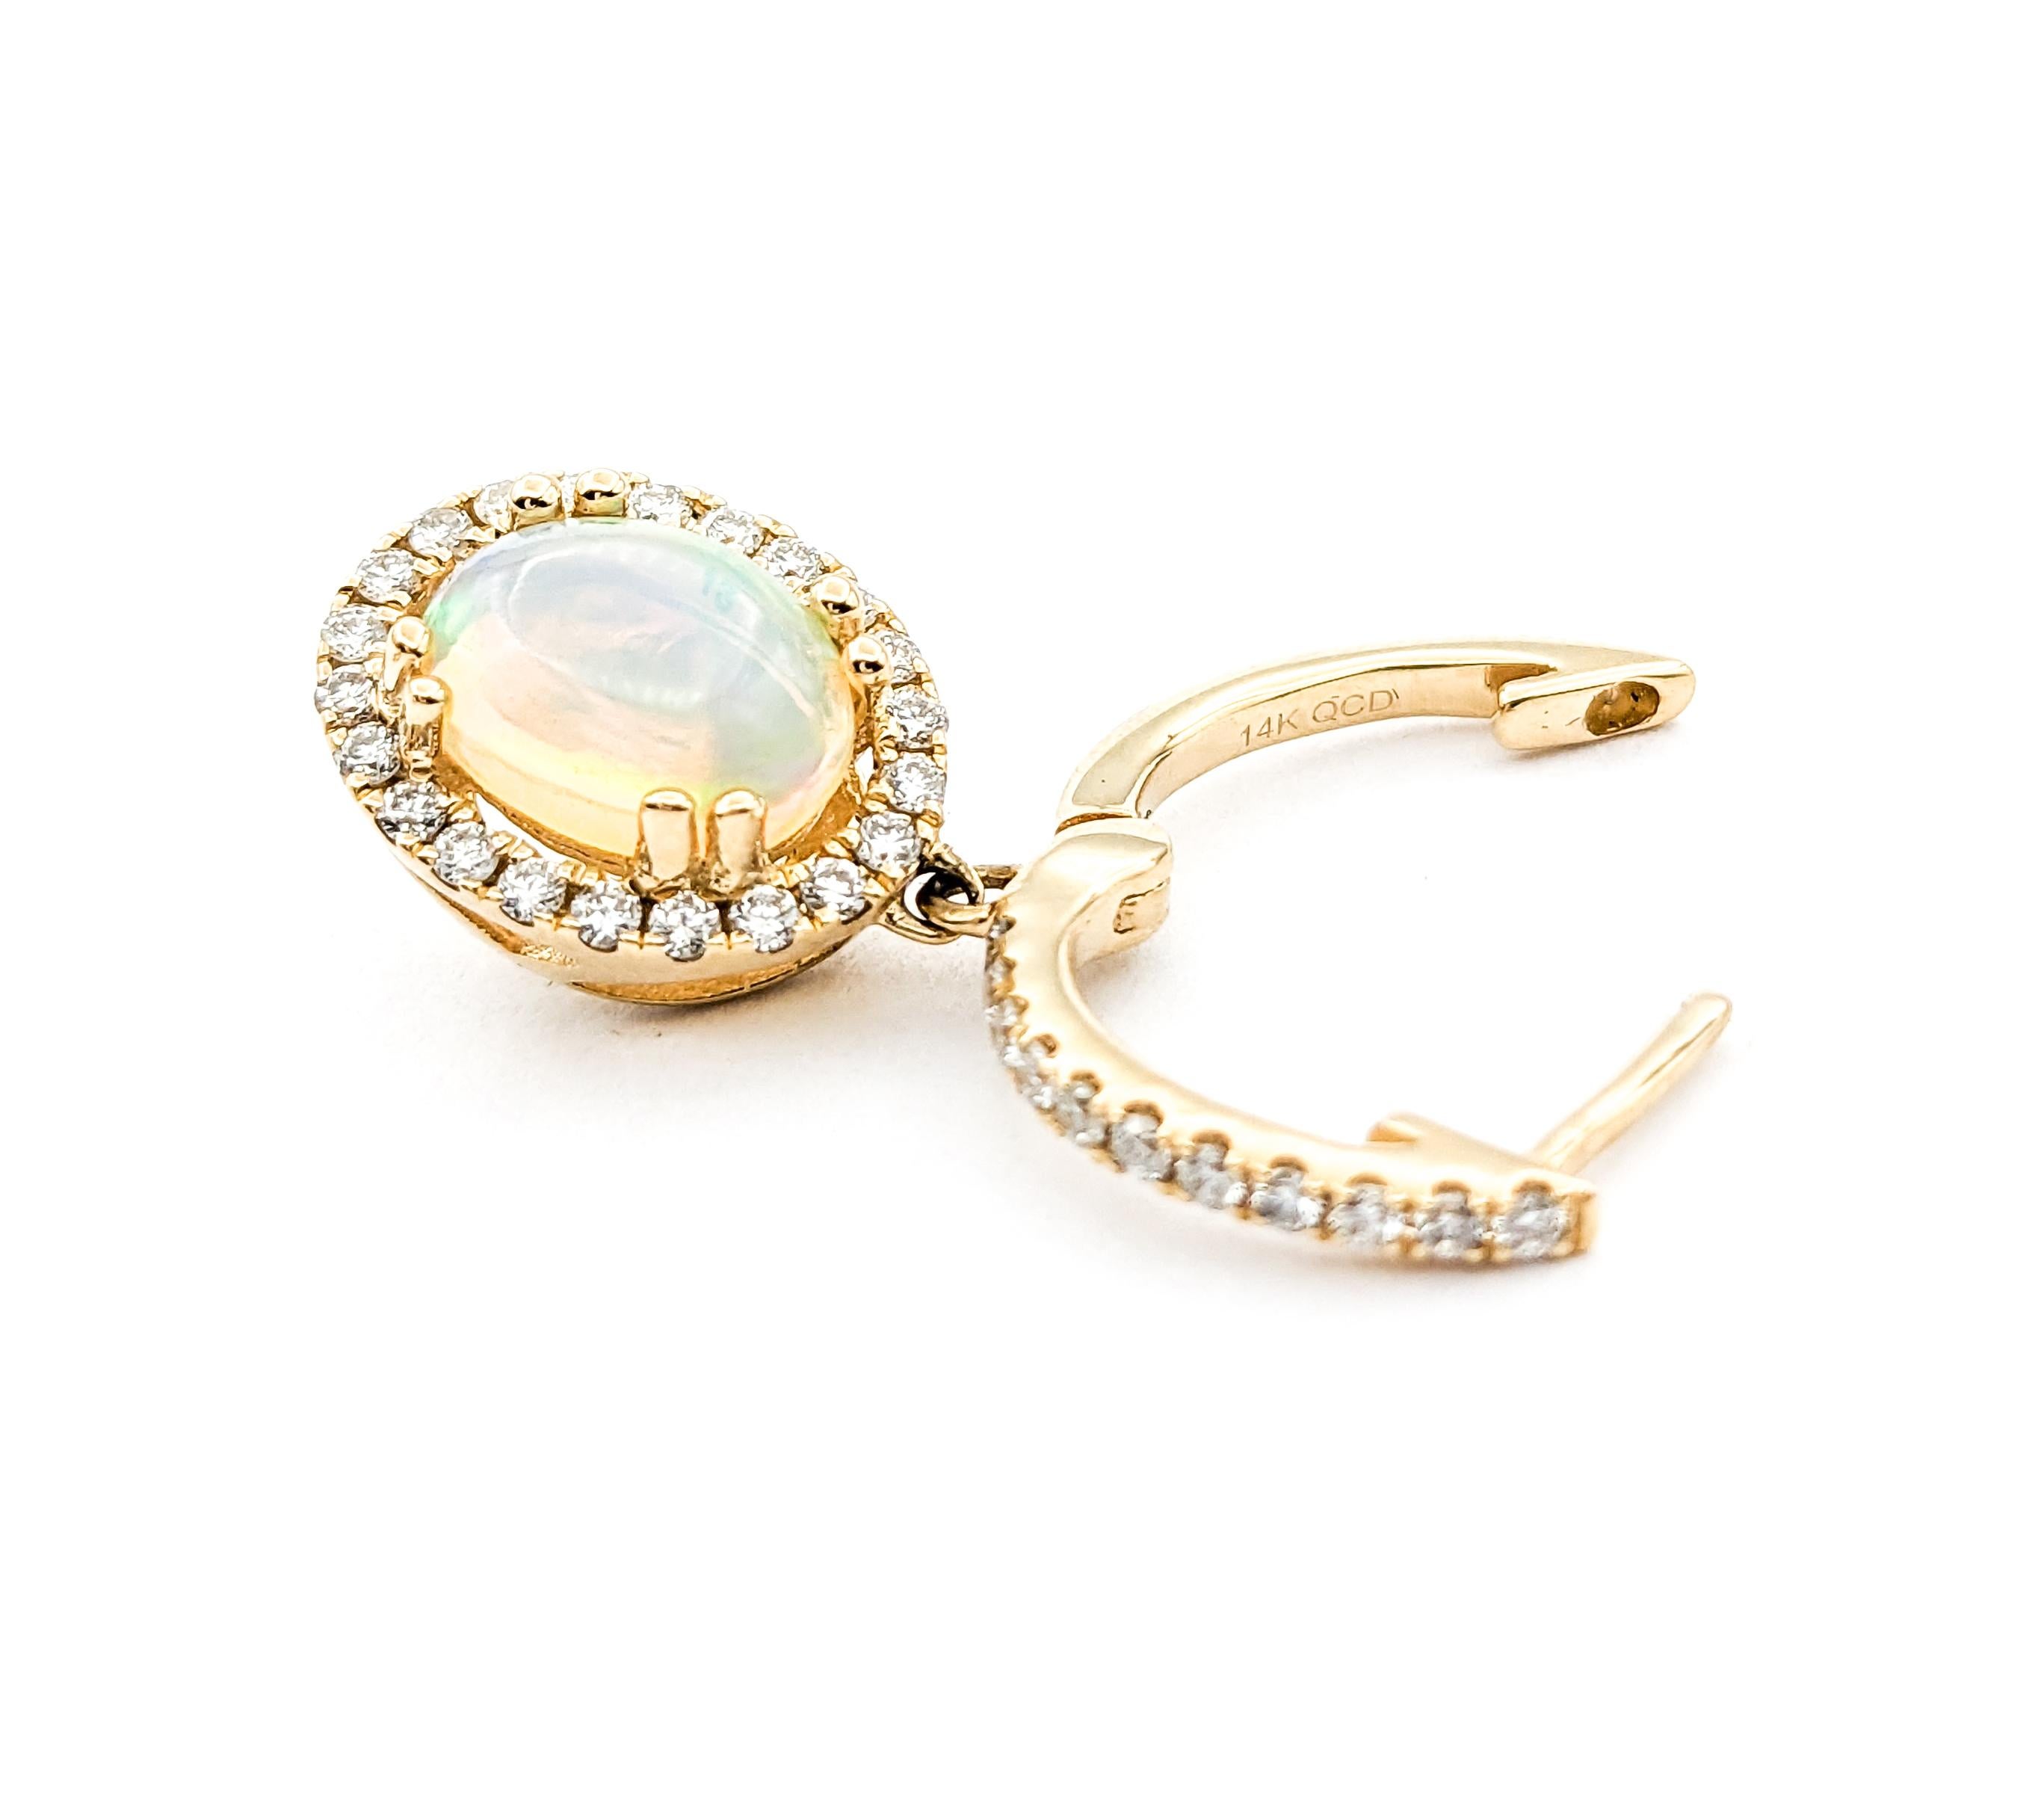 1.50ctw Opal & Diamond leverback Drop Earrings In Yellow Gold

Introducing these exquisite gemstone fashion earrings crafted in 14kt yellow gold. These earrings feature .46ctw of diamonds paired with a stunning 1.50ctw of opal in a leverback drop